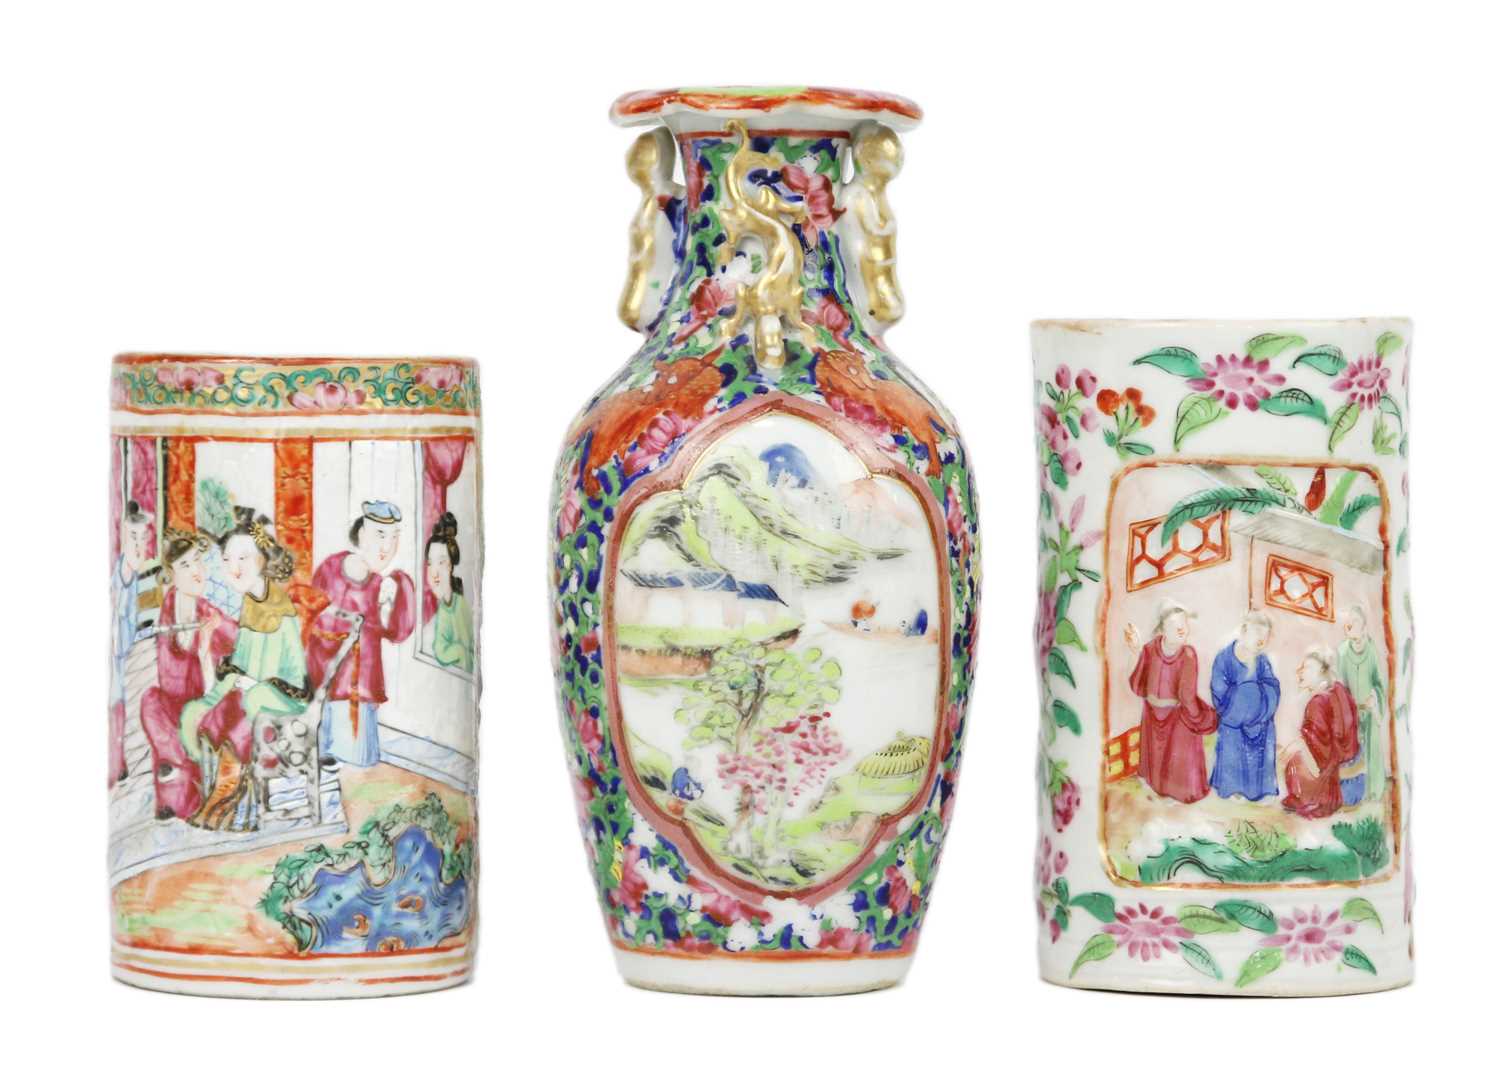 A quantity of Chinese Canton and other porcelain items, 19th century. - Image 6 of 6